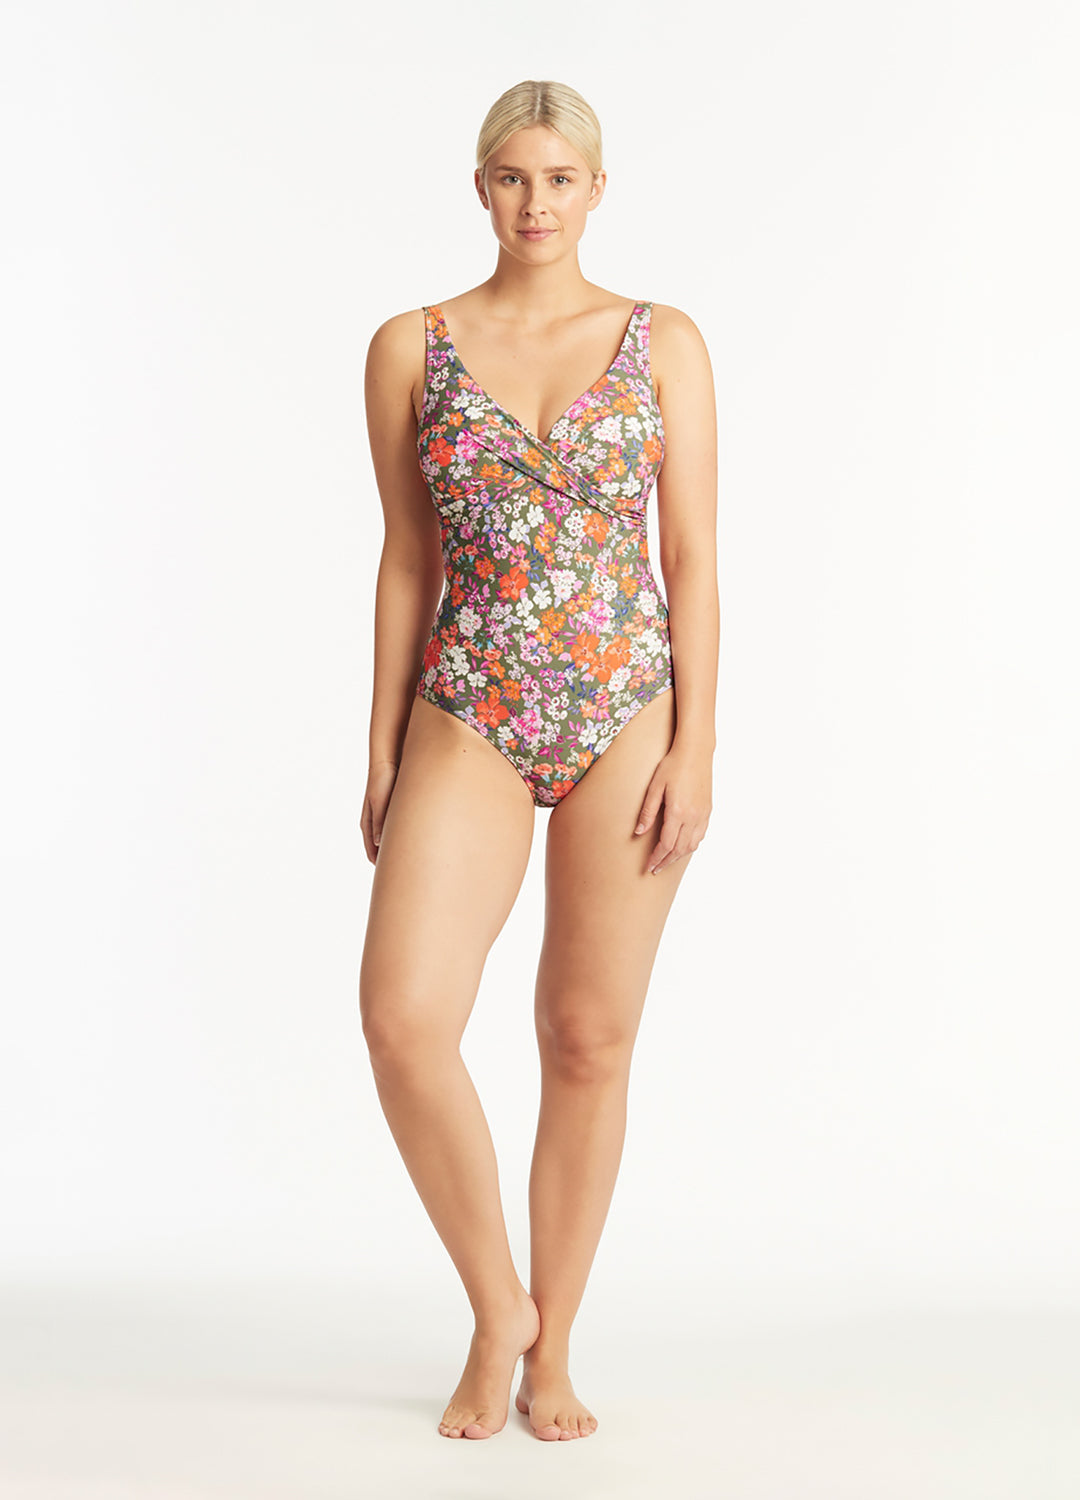 Full body view of the Sea Level Swim Australia 'Parkland' Cross Front One Piece Swimsuit in Khaki floral print at Inner Beach Co, Toronto, Ontario, Canada